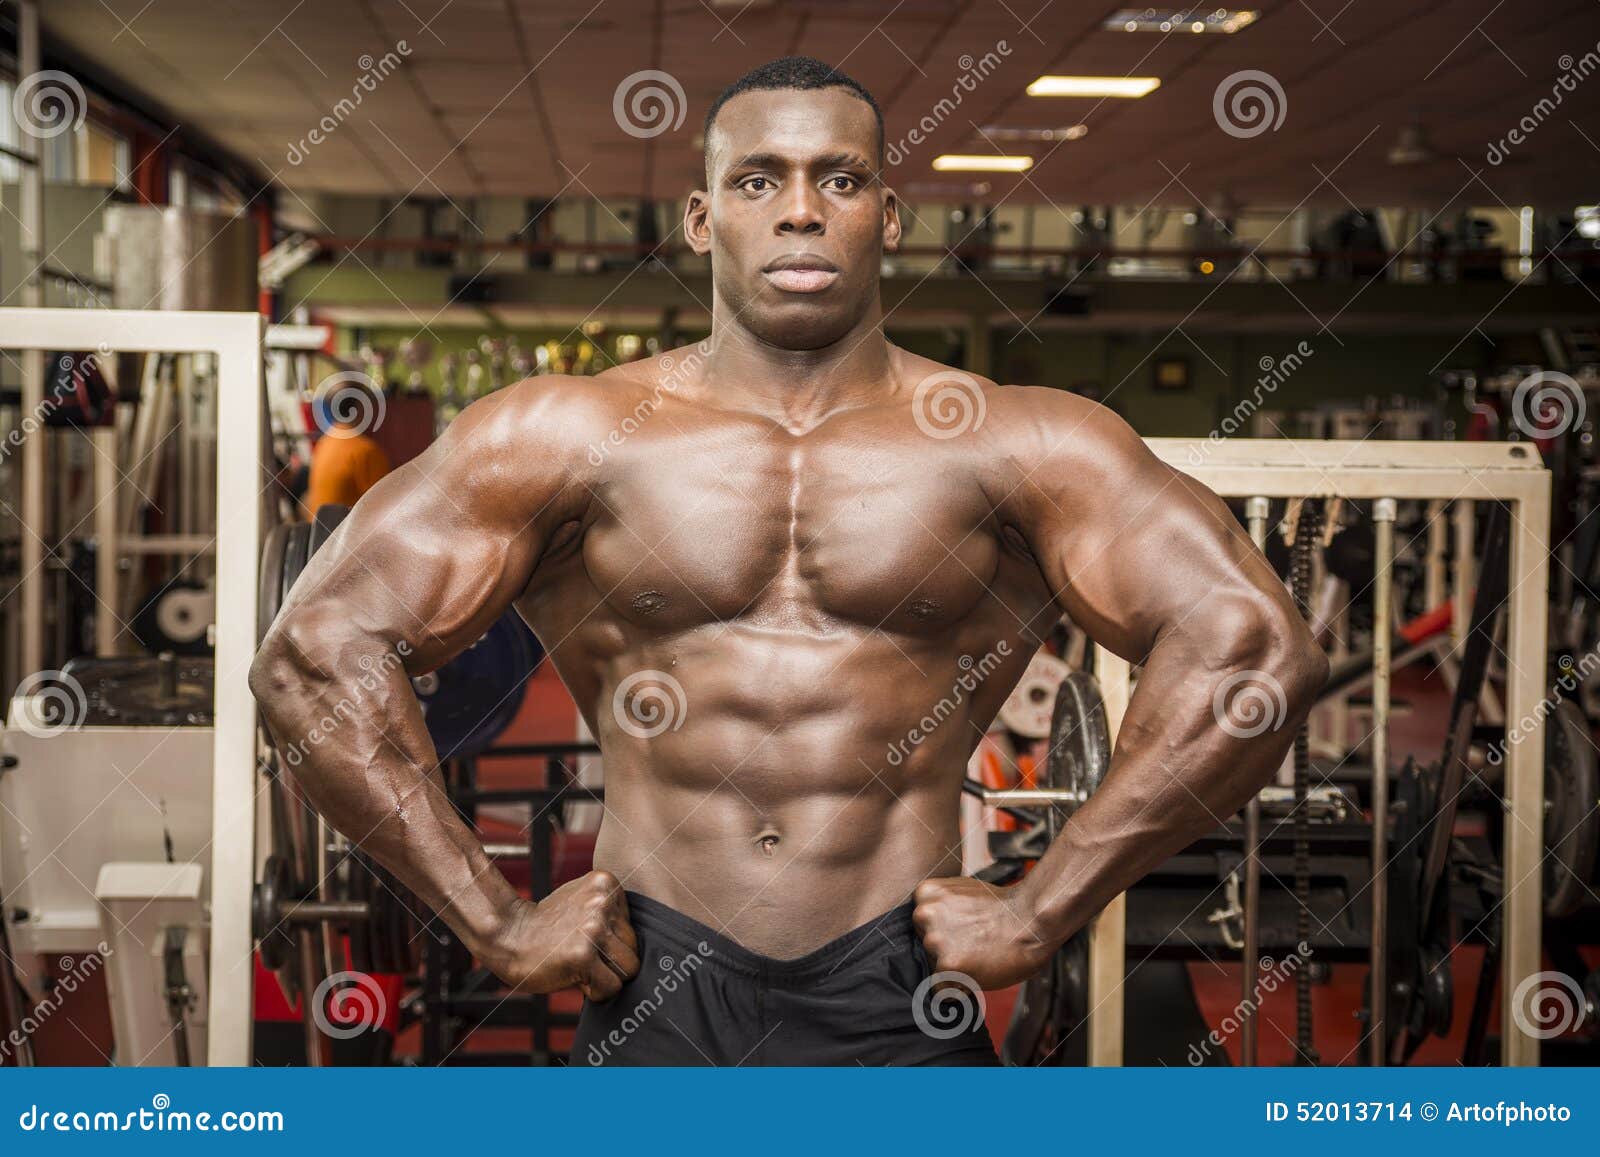 Free Photos - A Muscular Man Is Posing In A Gym, Showcasing His Impressive  Physique. He Is Standing In Front Of A Mirror, Flexing His Muscles And  Smiling For The Camera. The